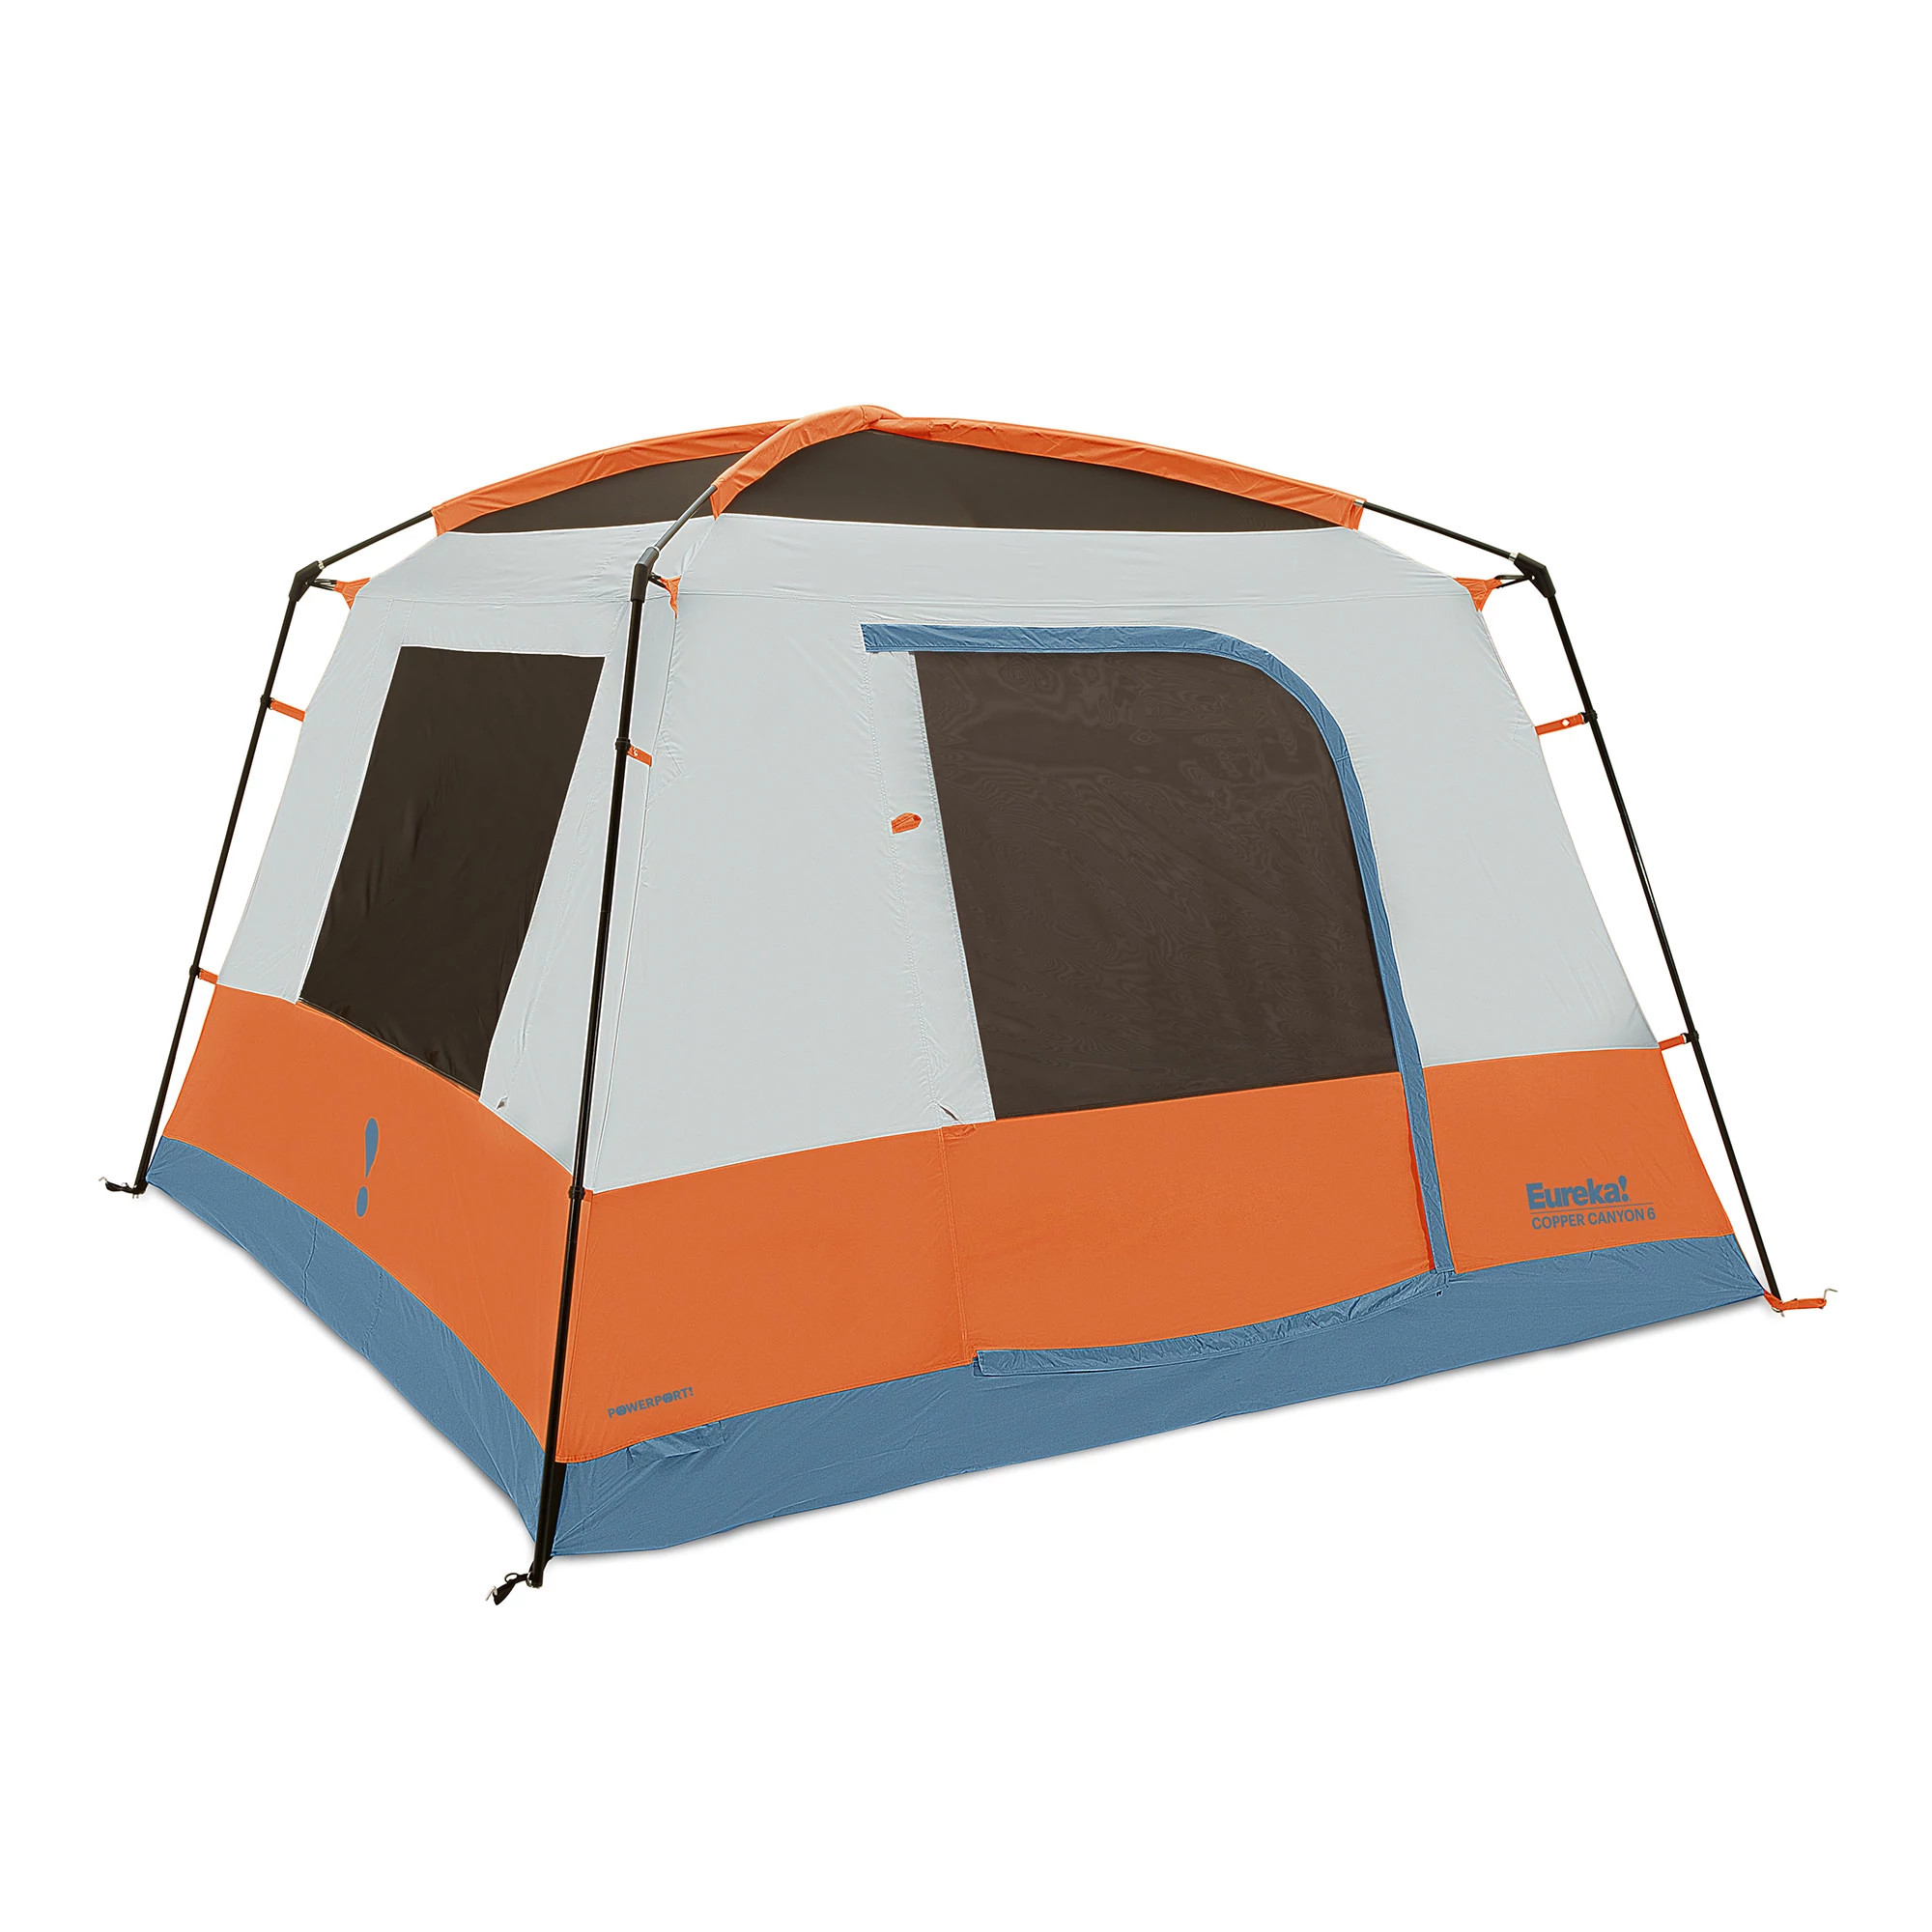 Staat strategie Verbanning Copper Canyon LX 6 Person Tent - Eureka